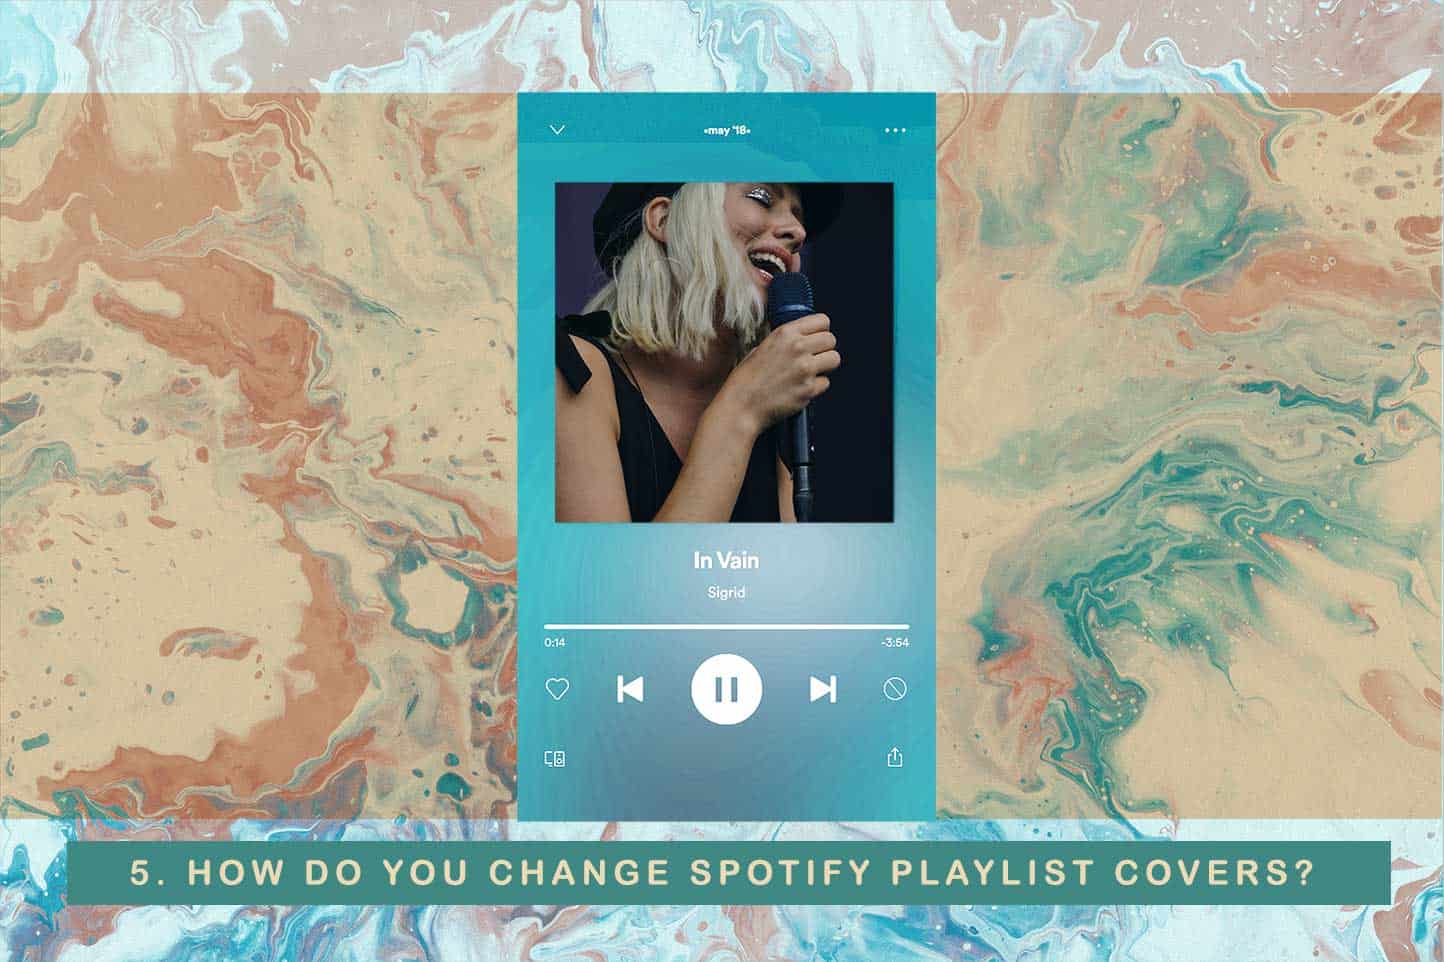 playlist-and-its-cover-with-title-How-do-you-change-spotify-playlist-covers